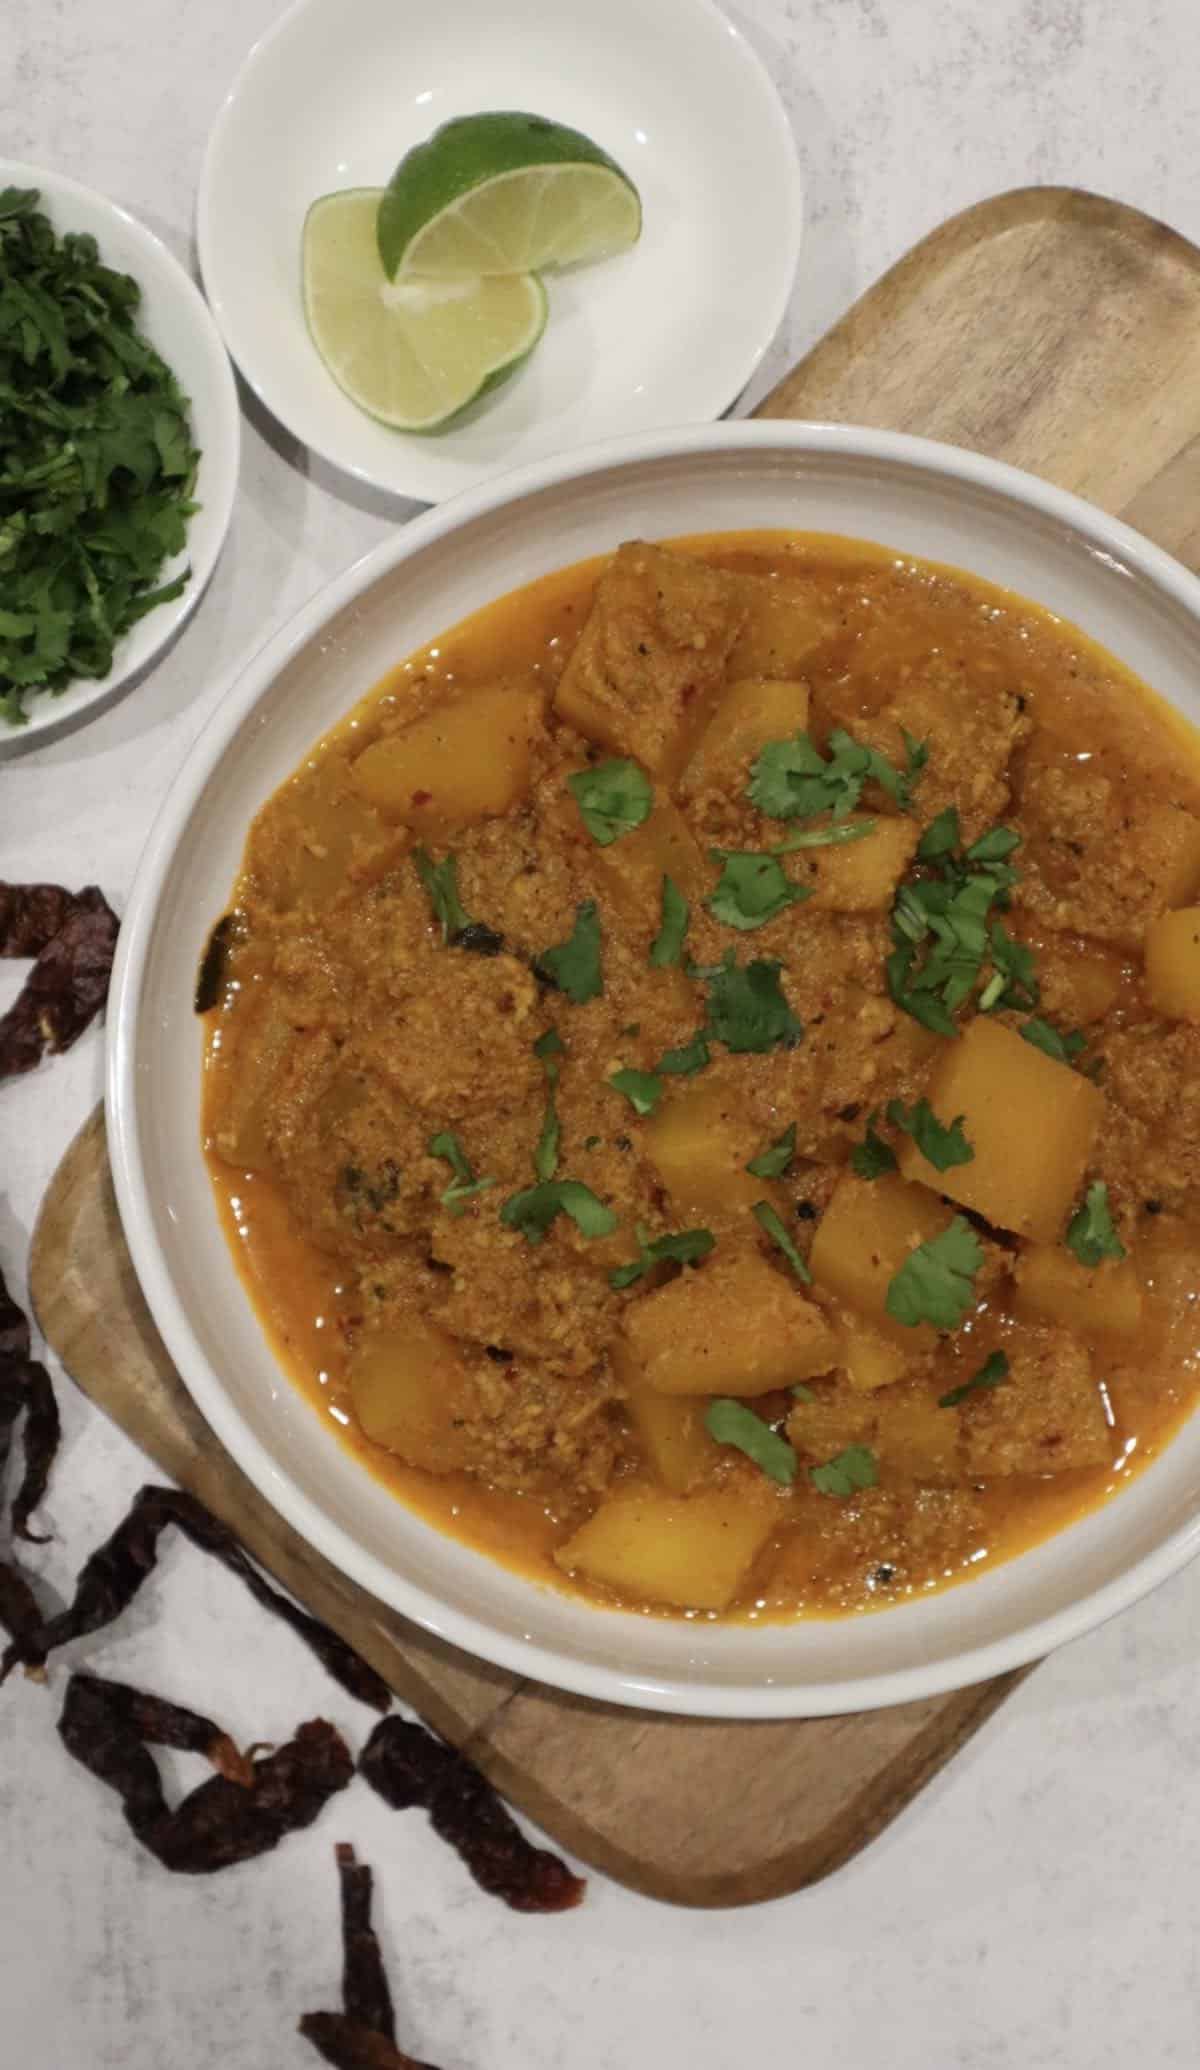 The most delicious South Indian style pumpkin curry you will ever make! It is spicy, aromatic, comforting and packed with flavour.
